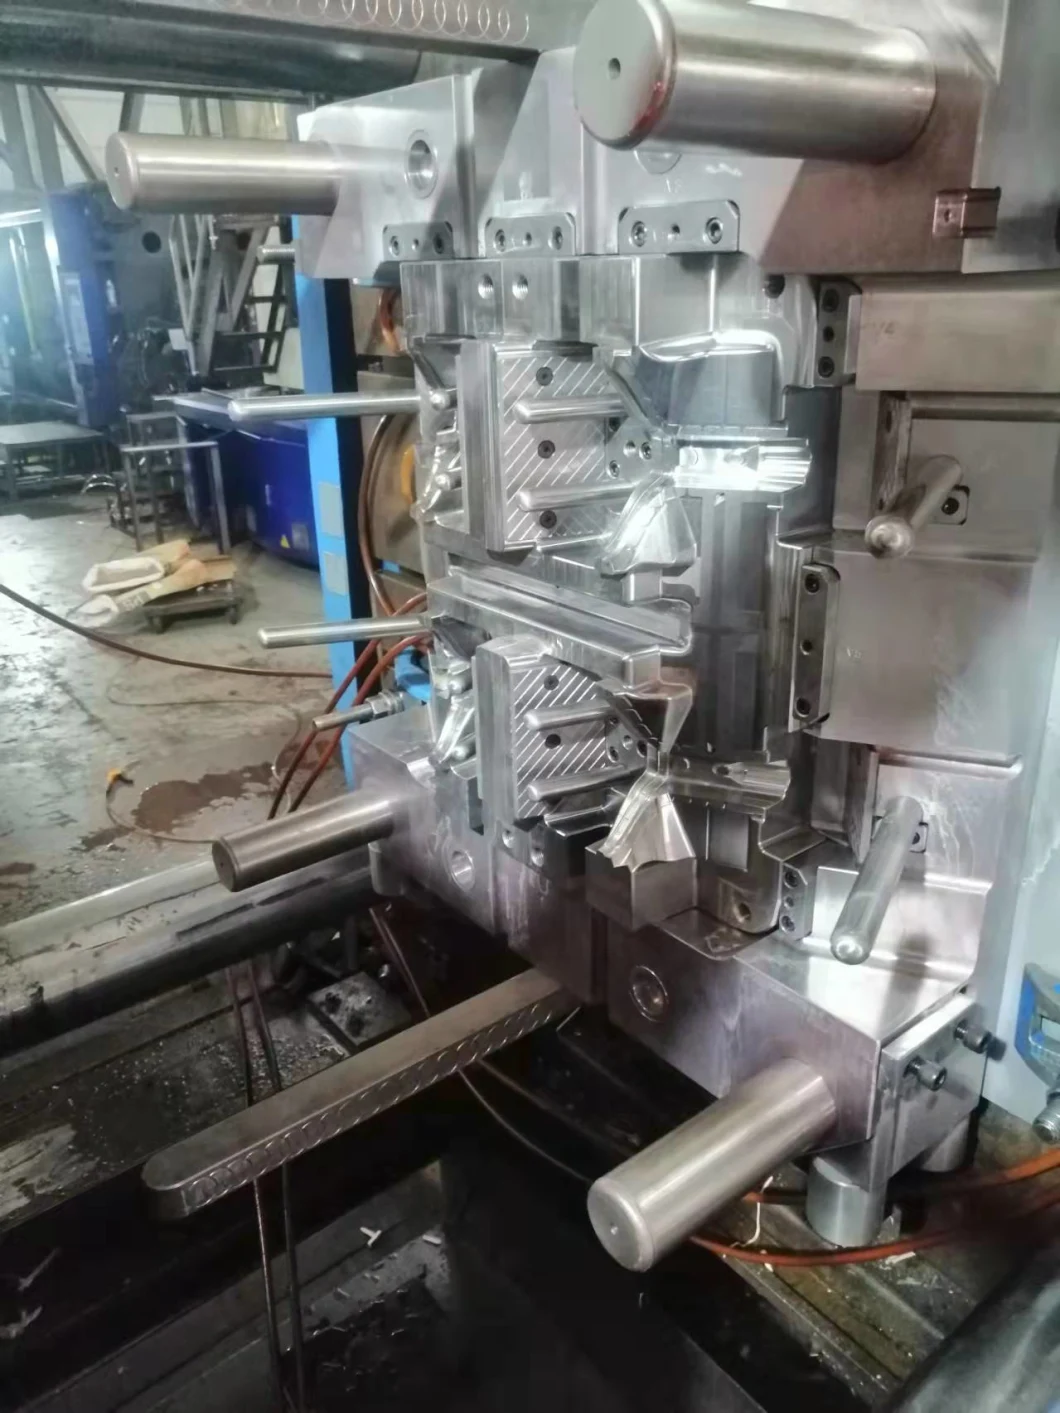 Moulding Producer Custom Plastic Injection Mold for Vacuum Cleaner Components